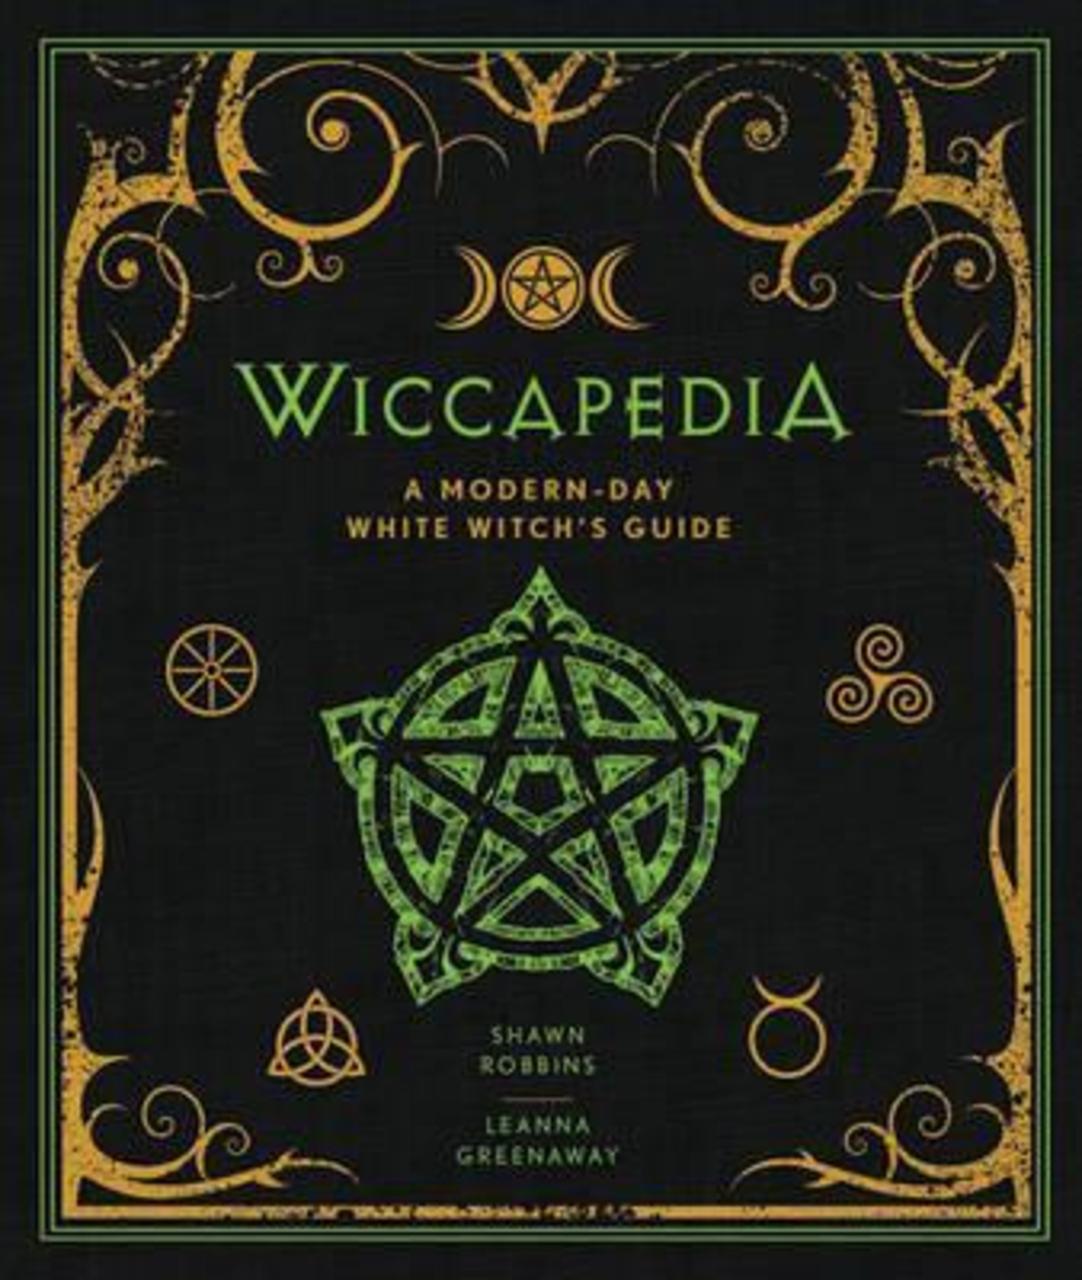 Sách - Wiccapedia : A Modern-Day White Witch's Guide by Shawn Robbins (US edition, hardcover)